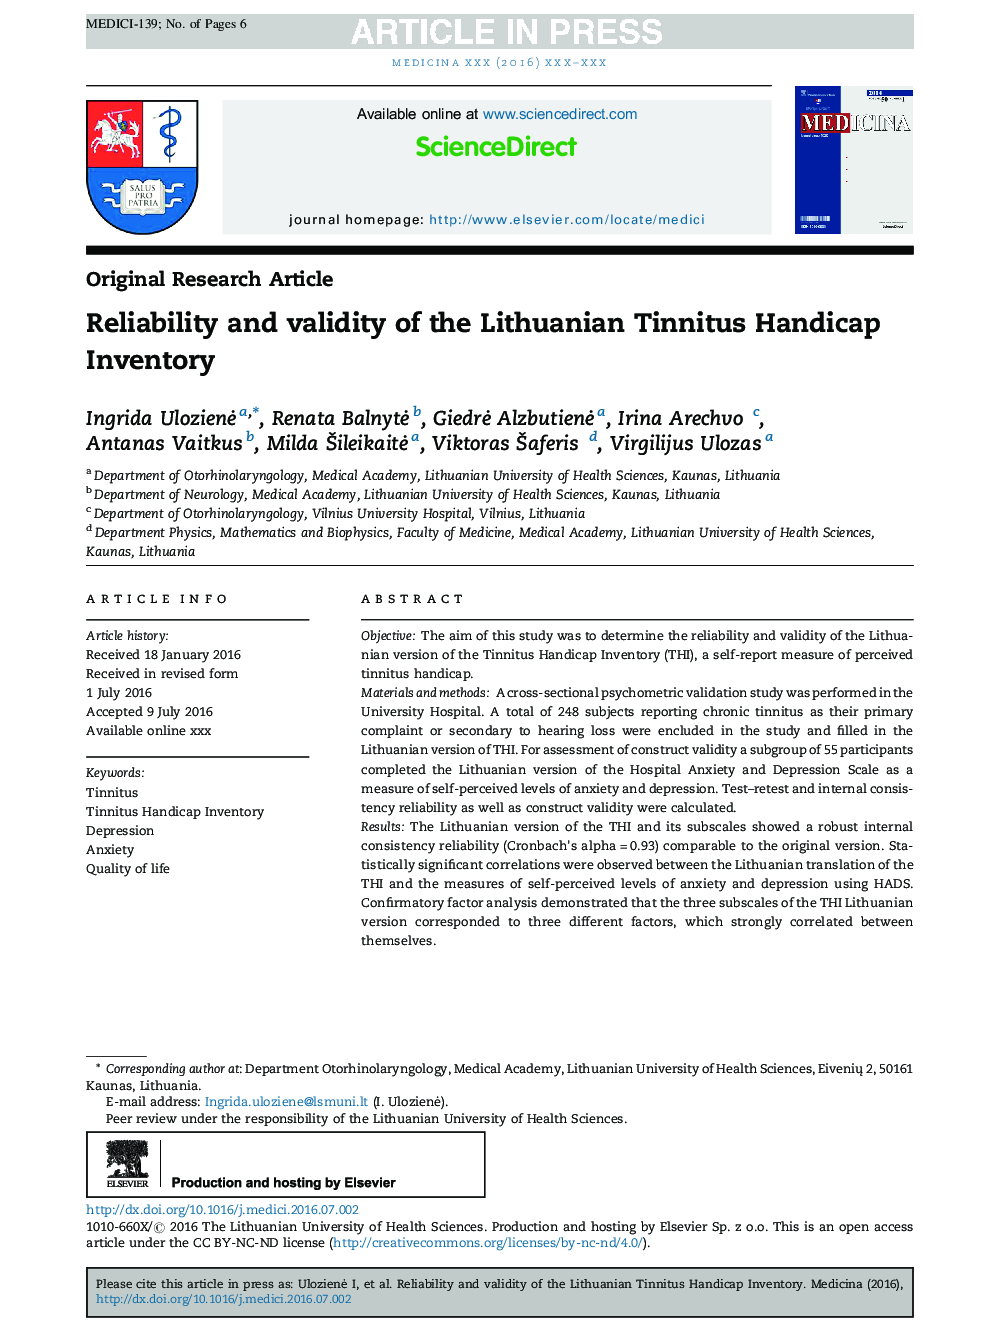 Reliability and validity of the Lithuanian Tinnitus Handicap Inventory